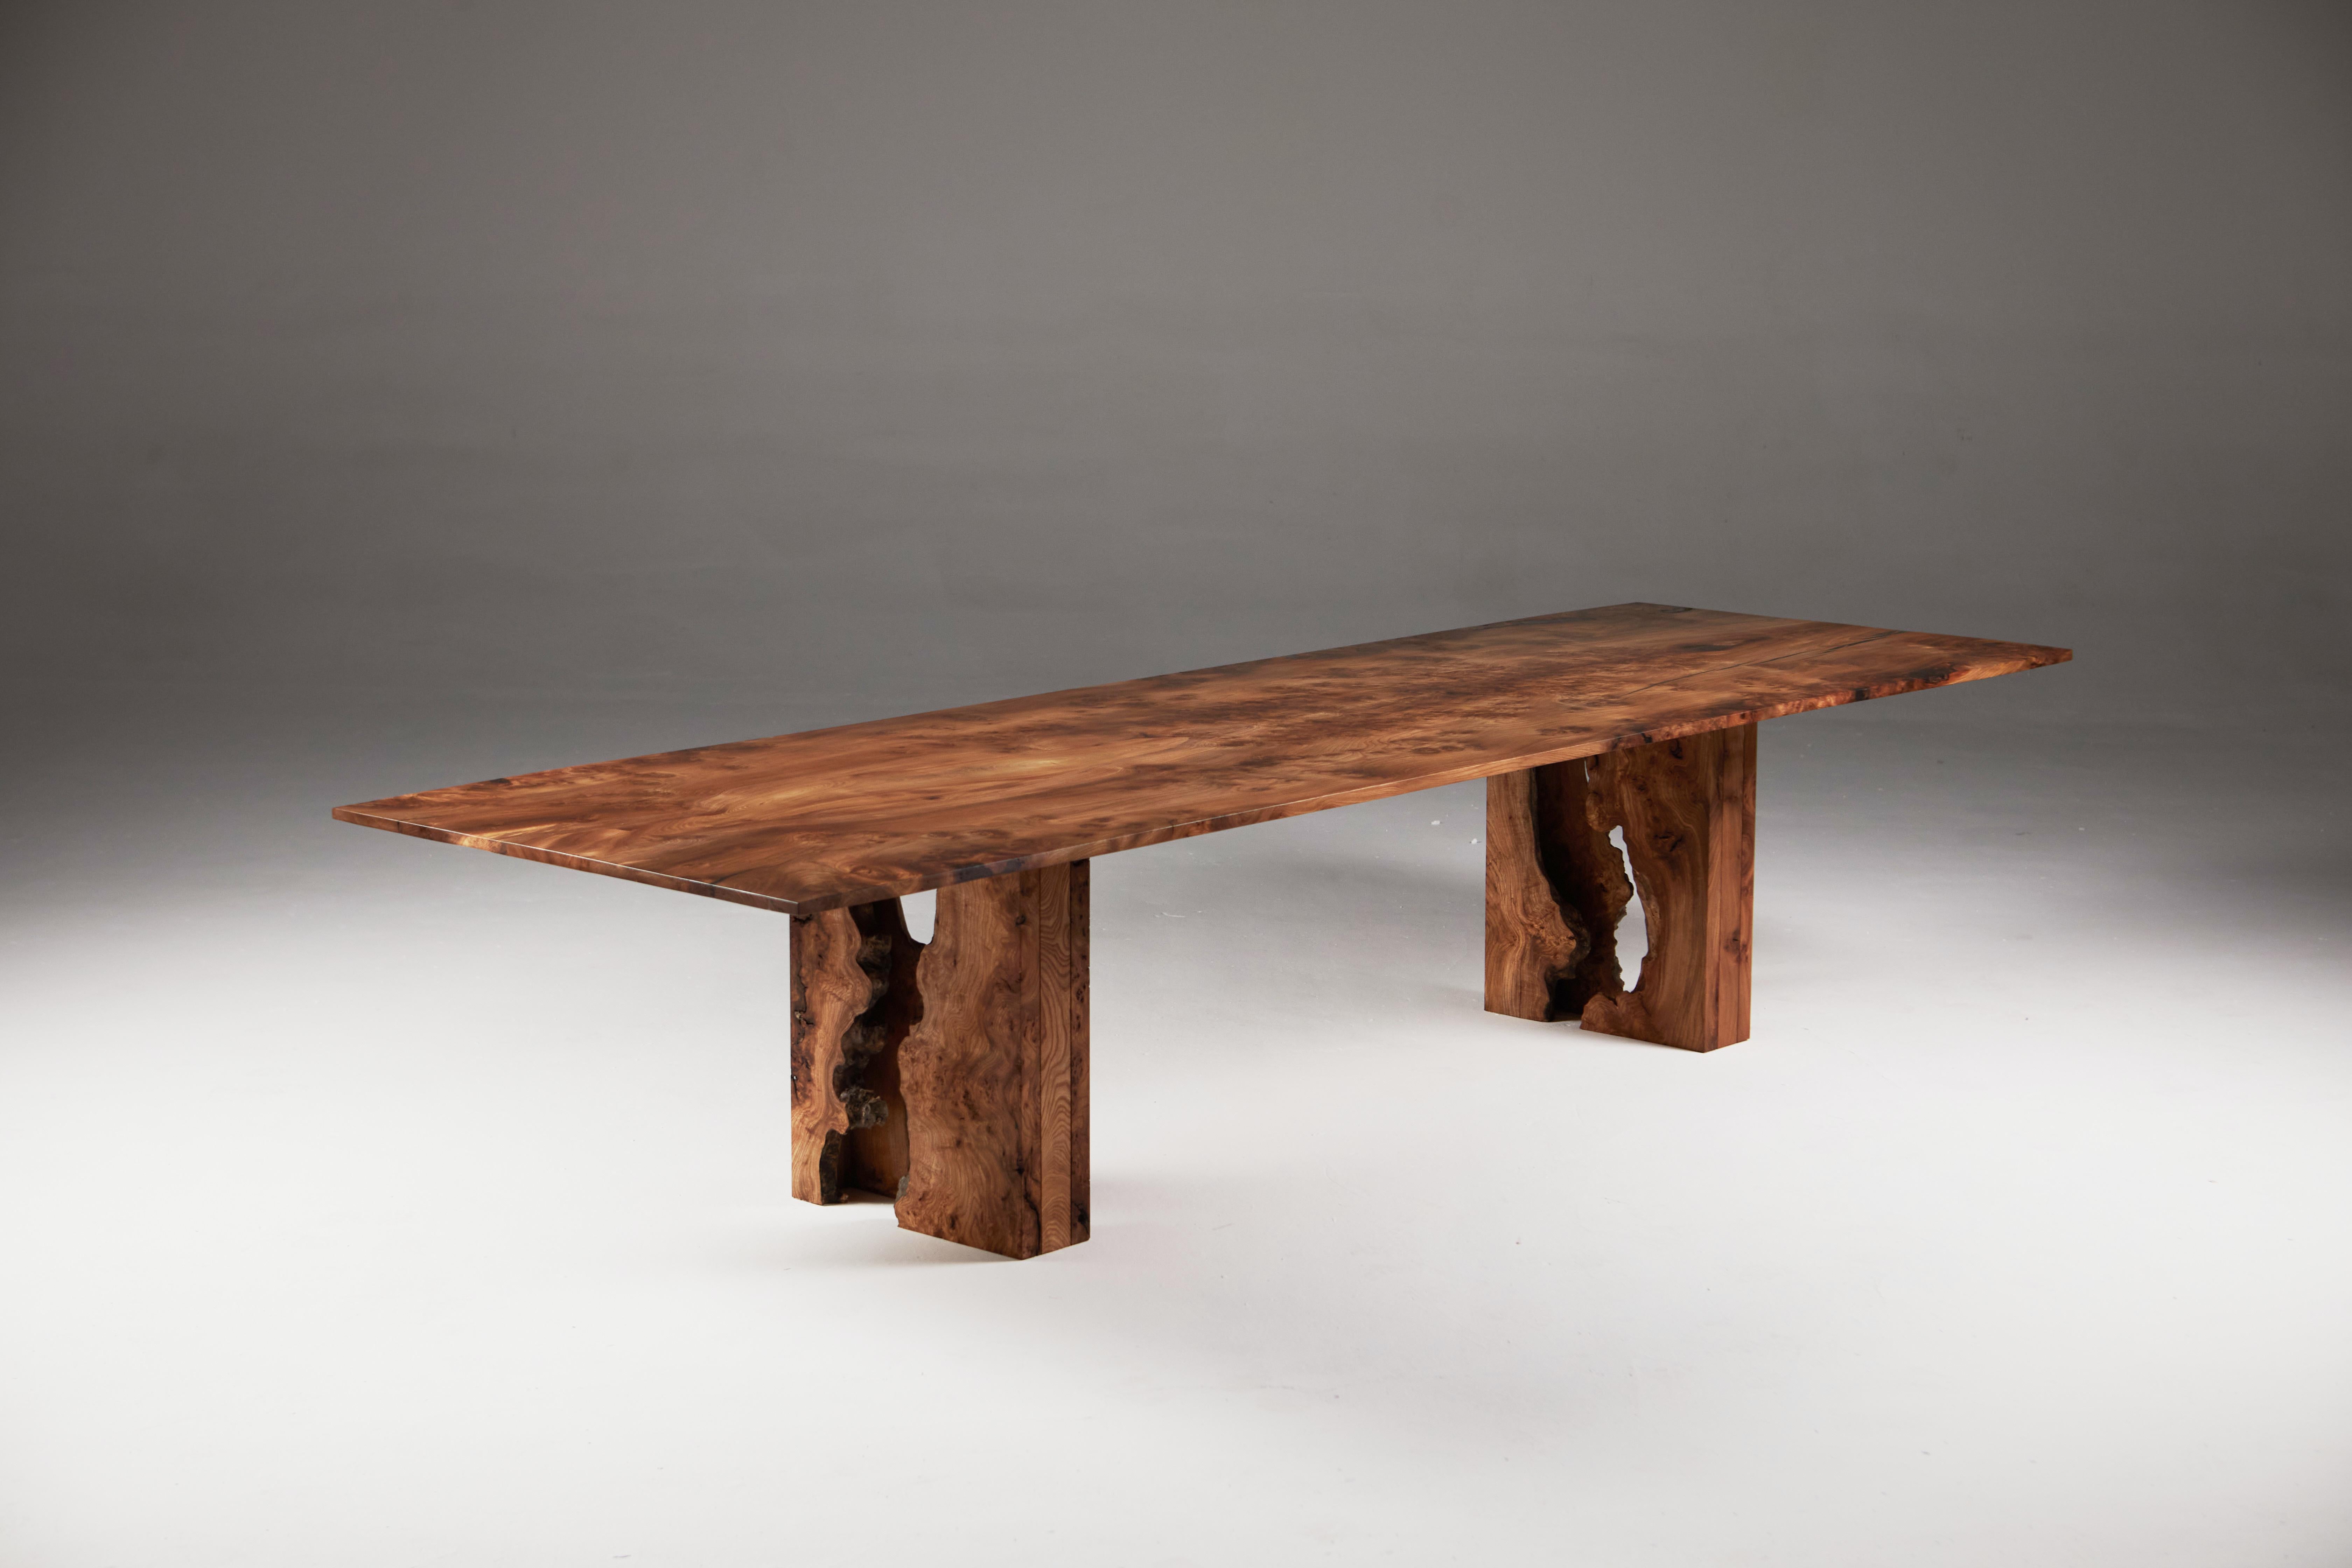 Scottish Burr Elm Table with inverted live edge legs and Bookmatched top.
The third image shows the book-matched top in full made from two slabs of solid elm. The table top is initialled and numbered on the underside with the consecutive project